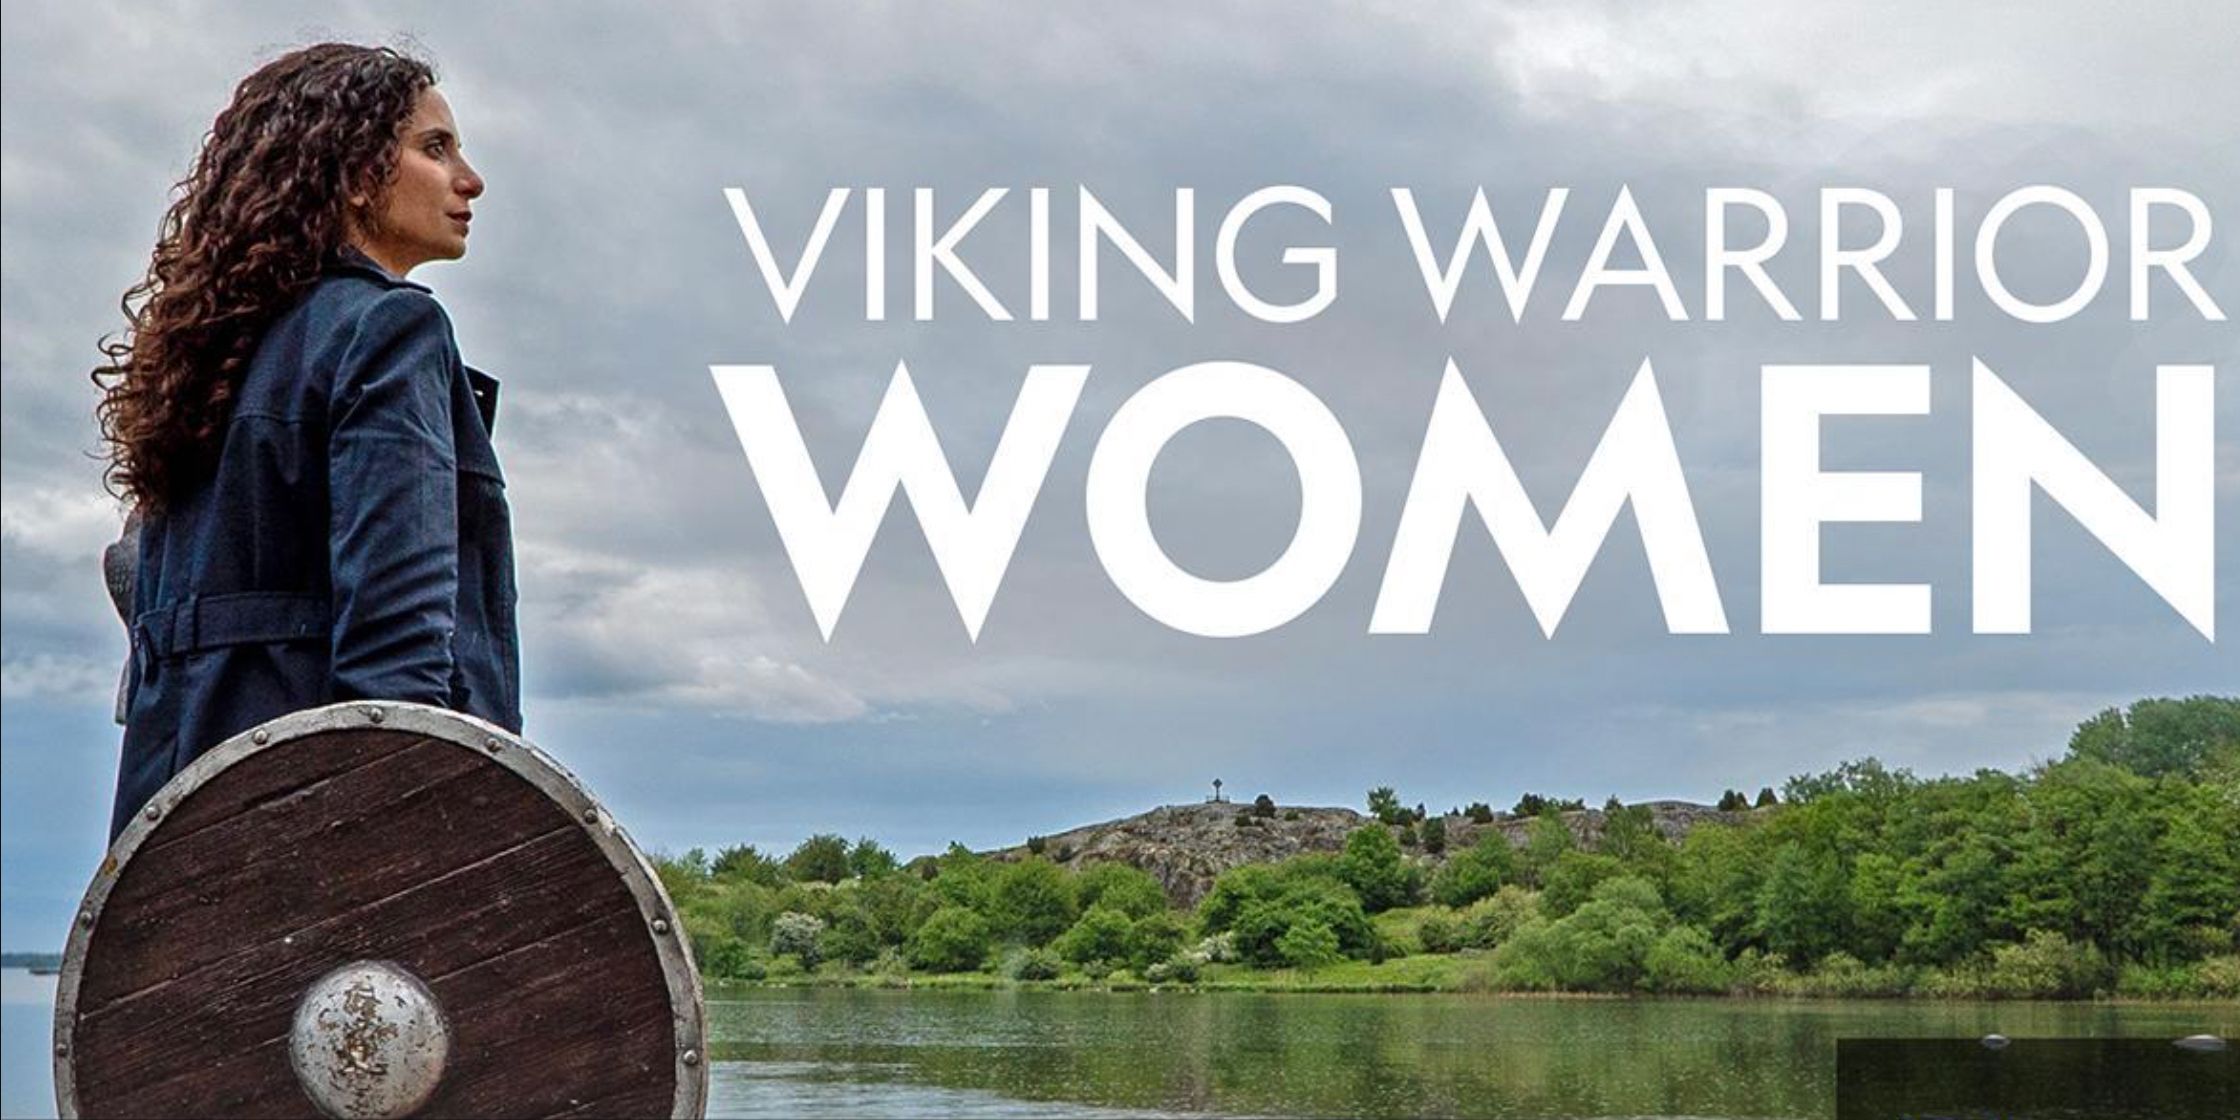 The title card for National Geographic special Viking Warrior Woman features a woman holding a shield and looking out on the water